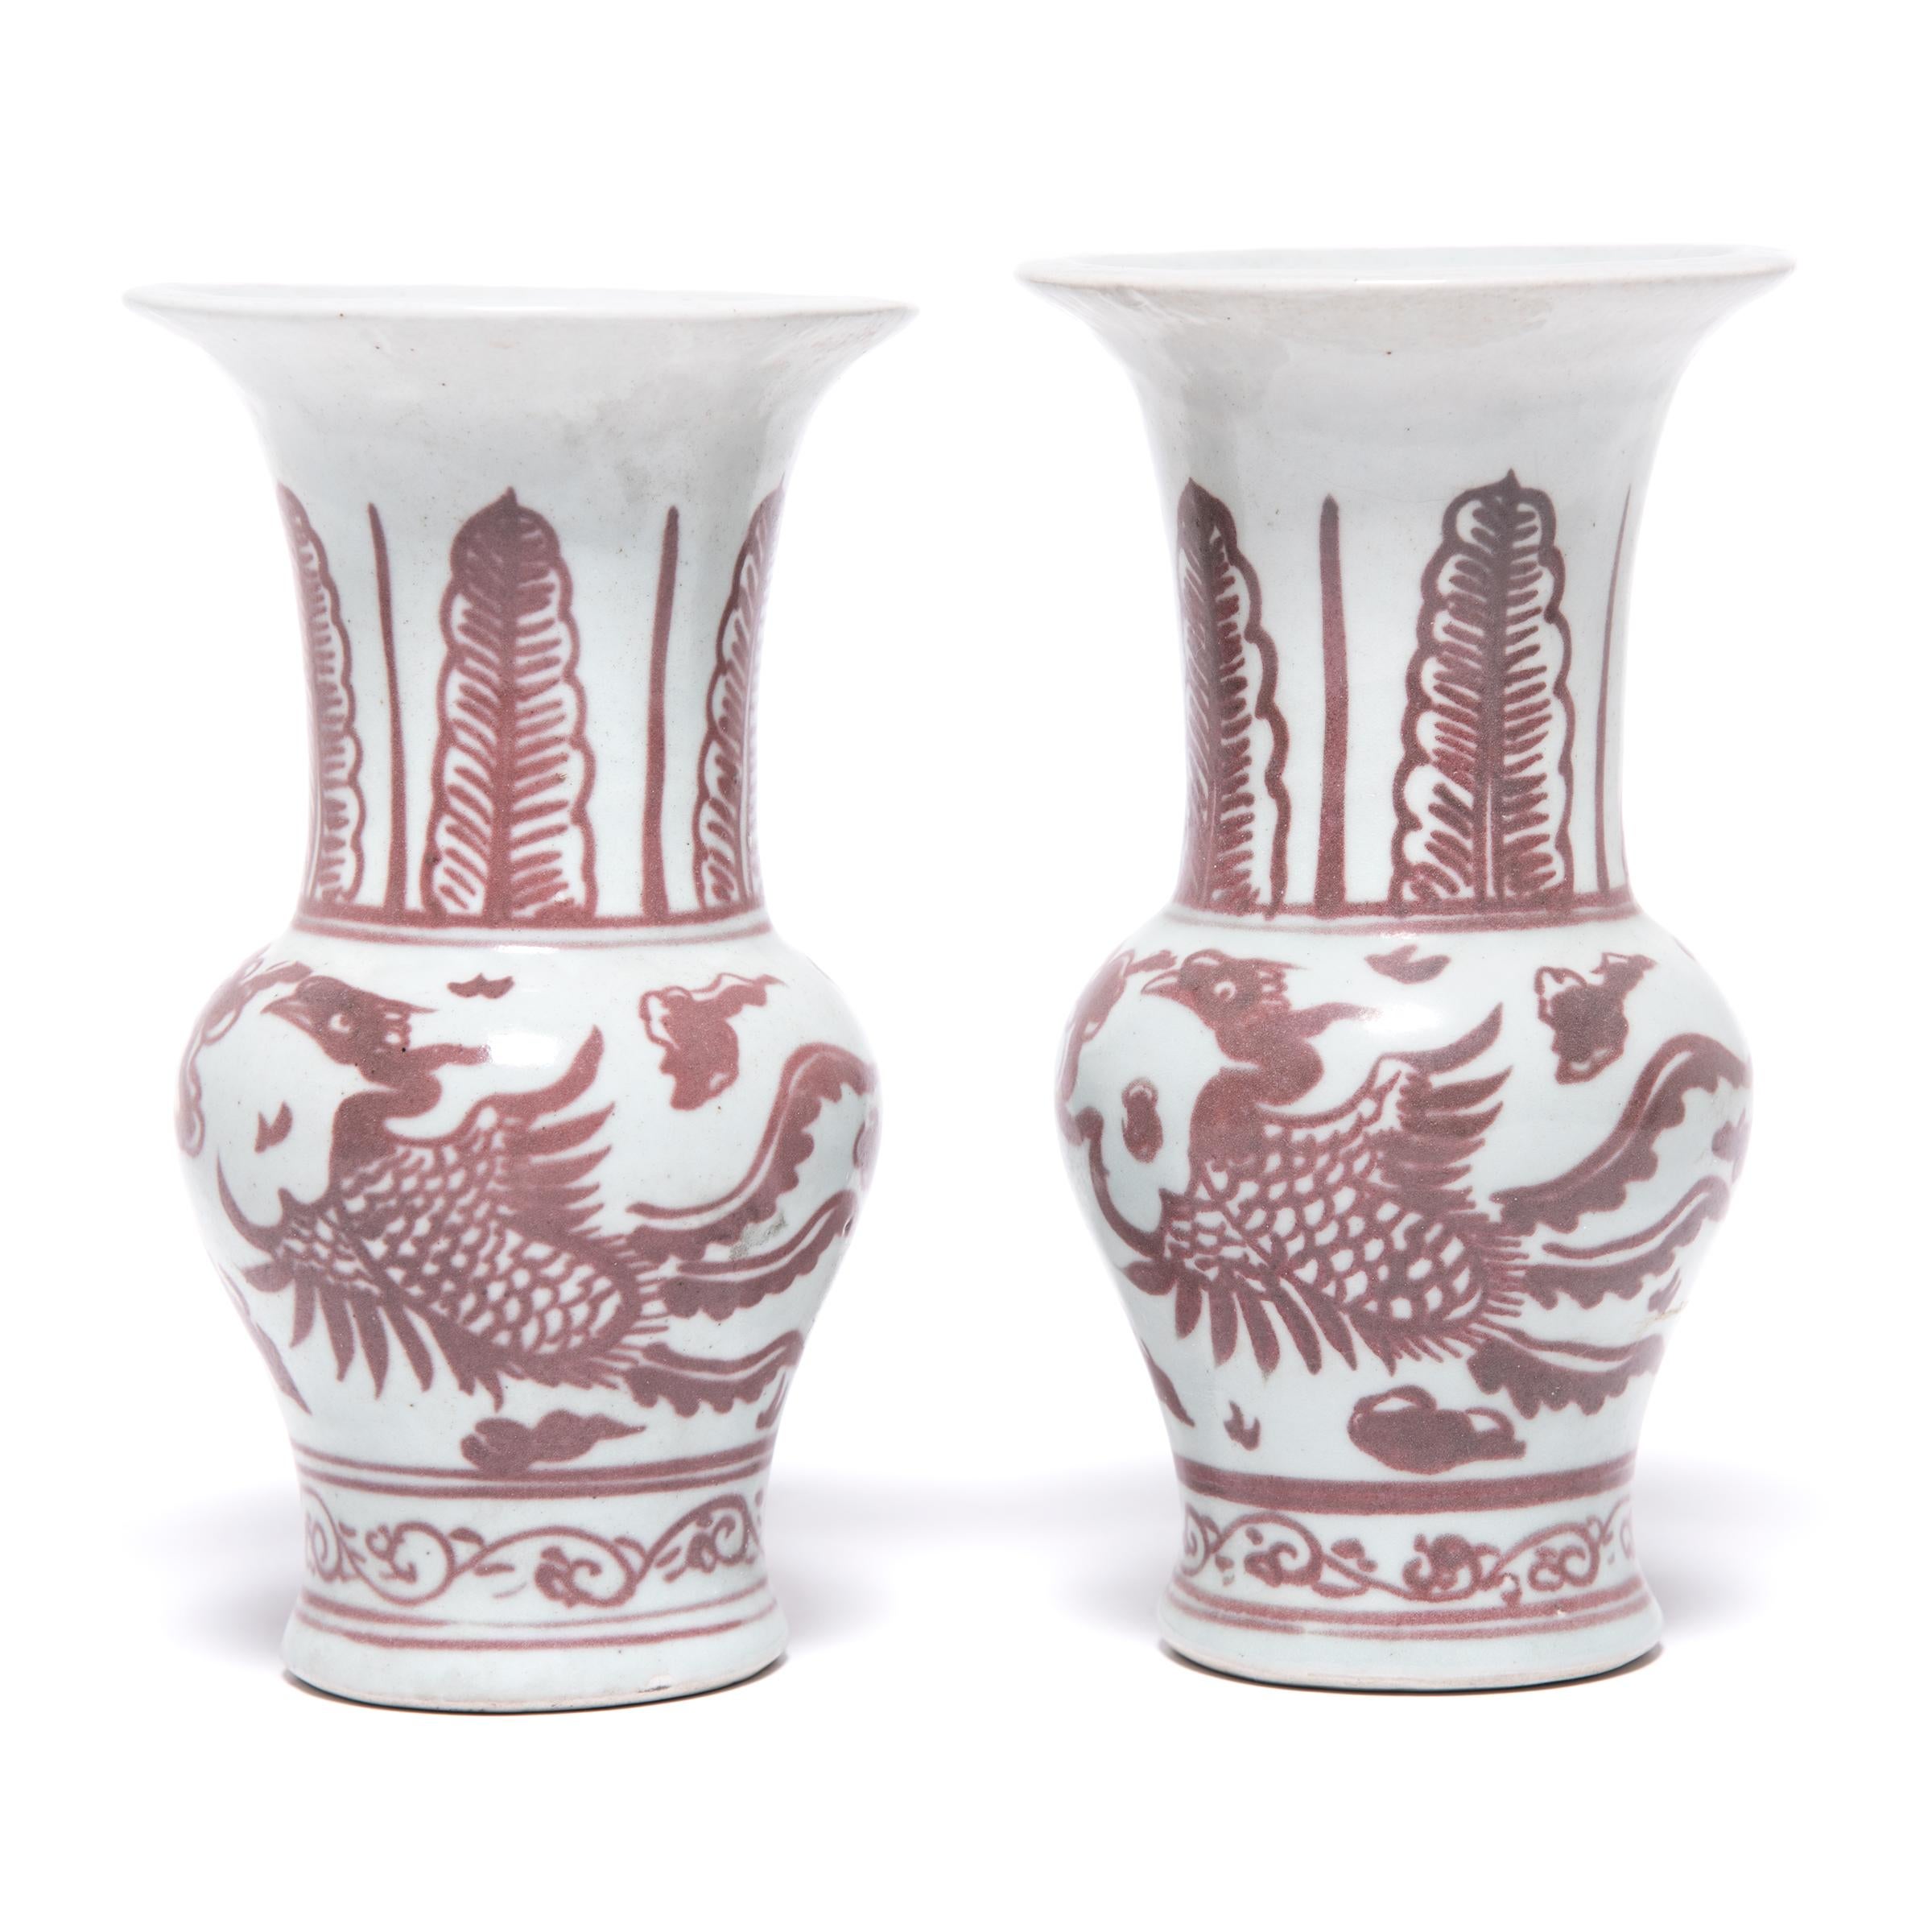 20th Century Chinese Red and White Phoenix Fantail Vase, c. 1900